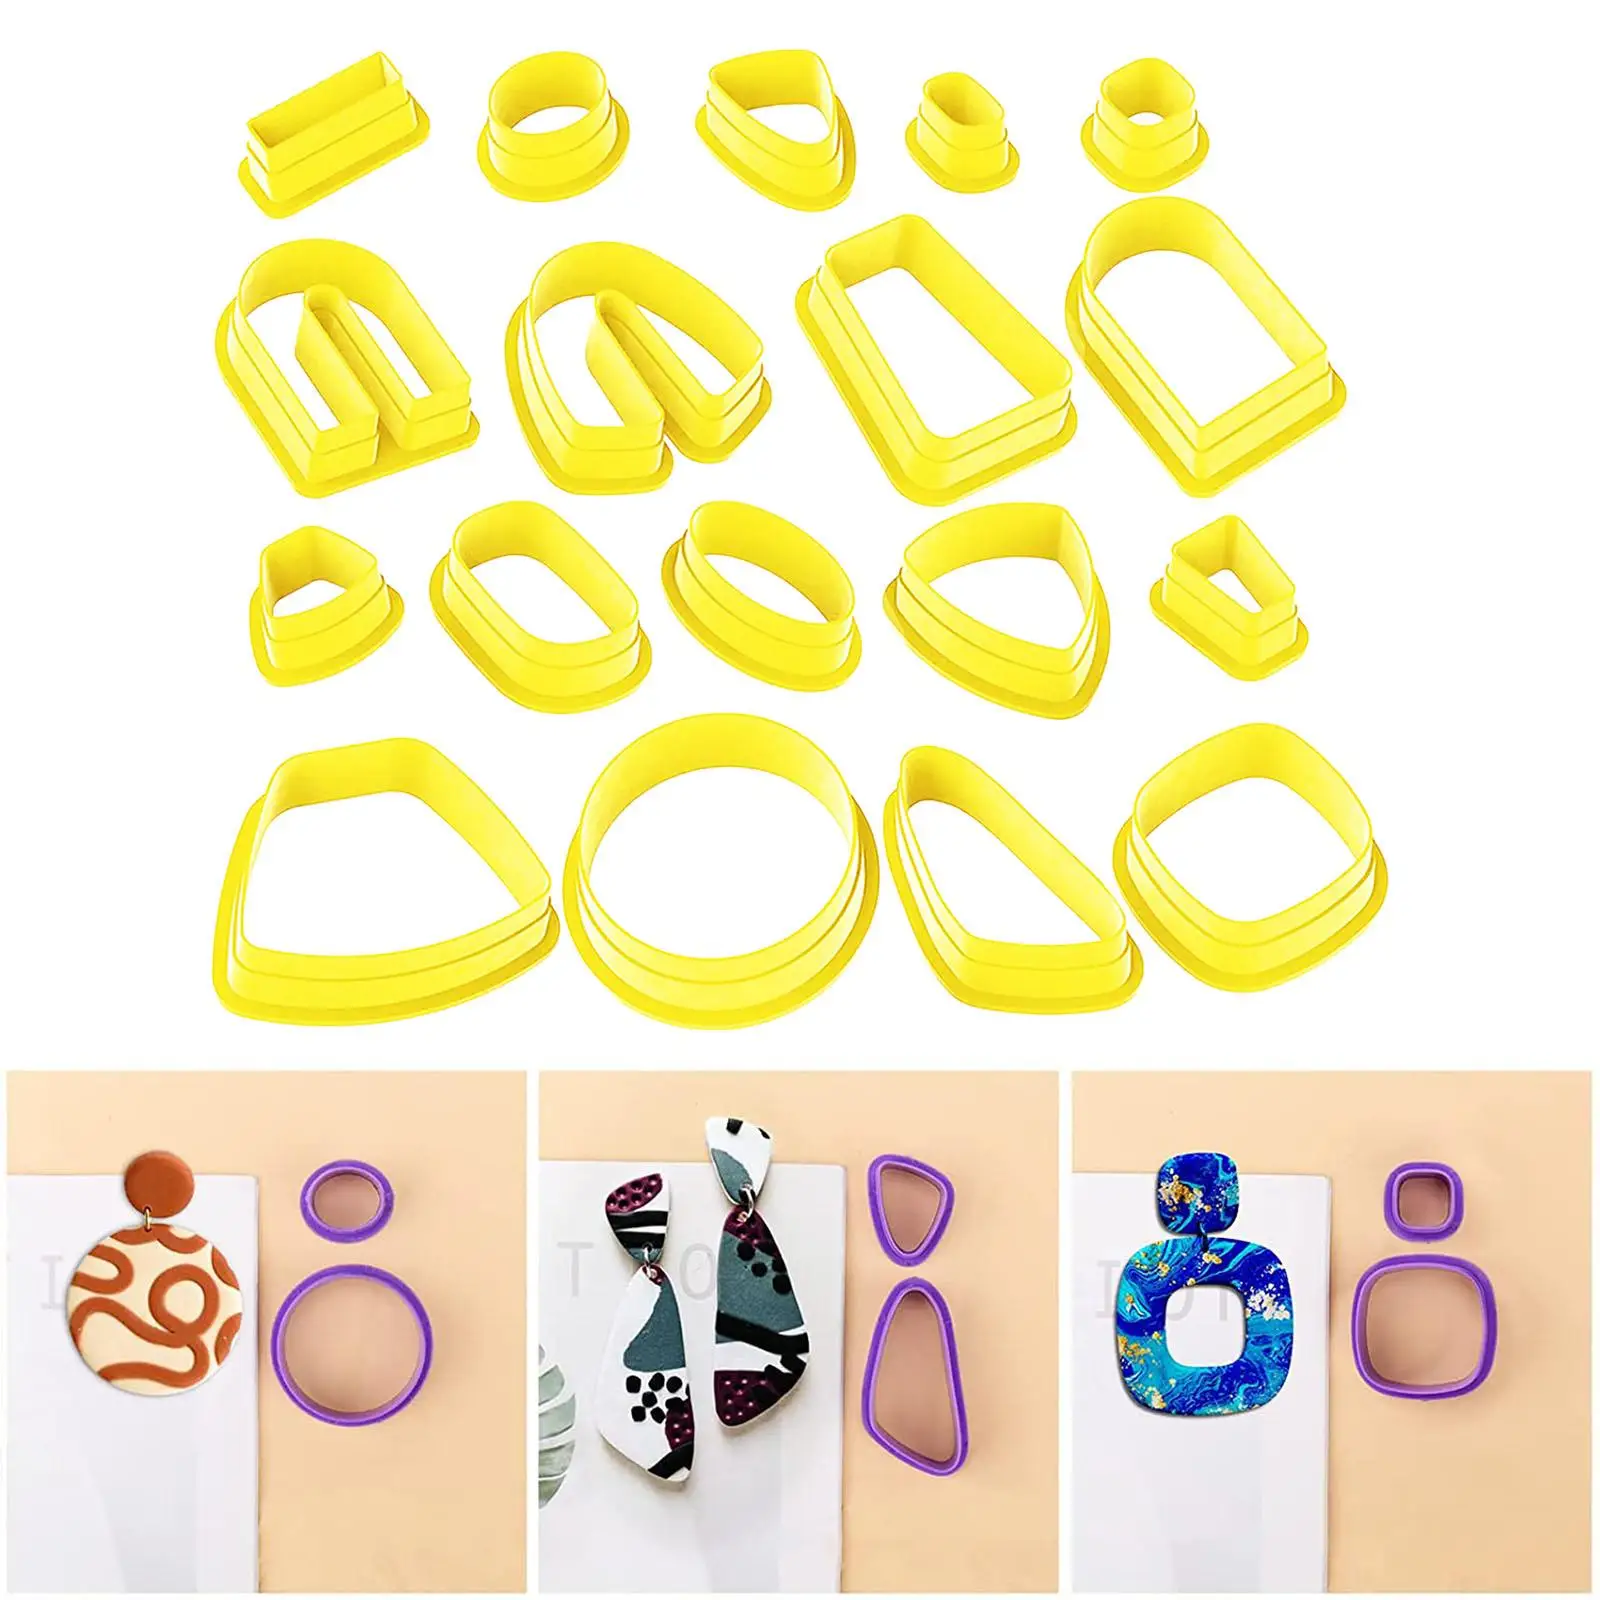 18 Pieces Polymer Clay Cutters Earring DIY Accessories Shapes Crafts Polymer Clay Jewelry Kids Jewelry Making Clay Tools Molds